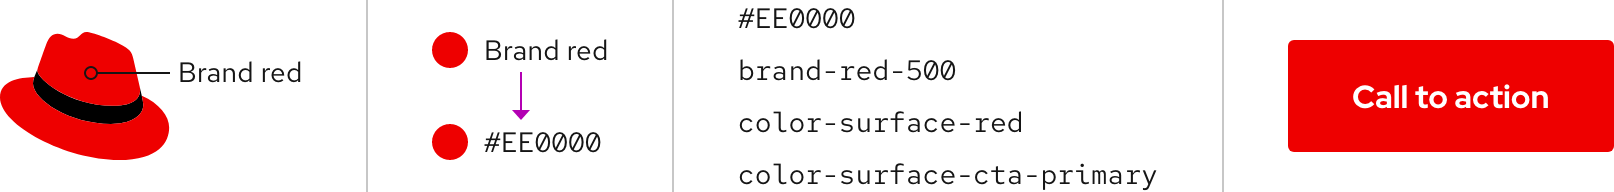 Flow showing how a color like brand red becomes a token, how it is named, and how it is applied to a call to action